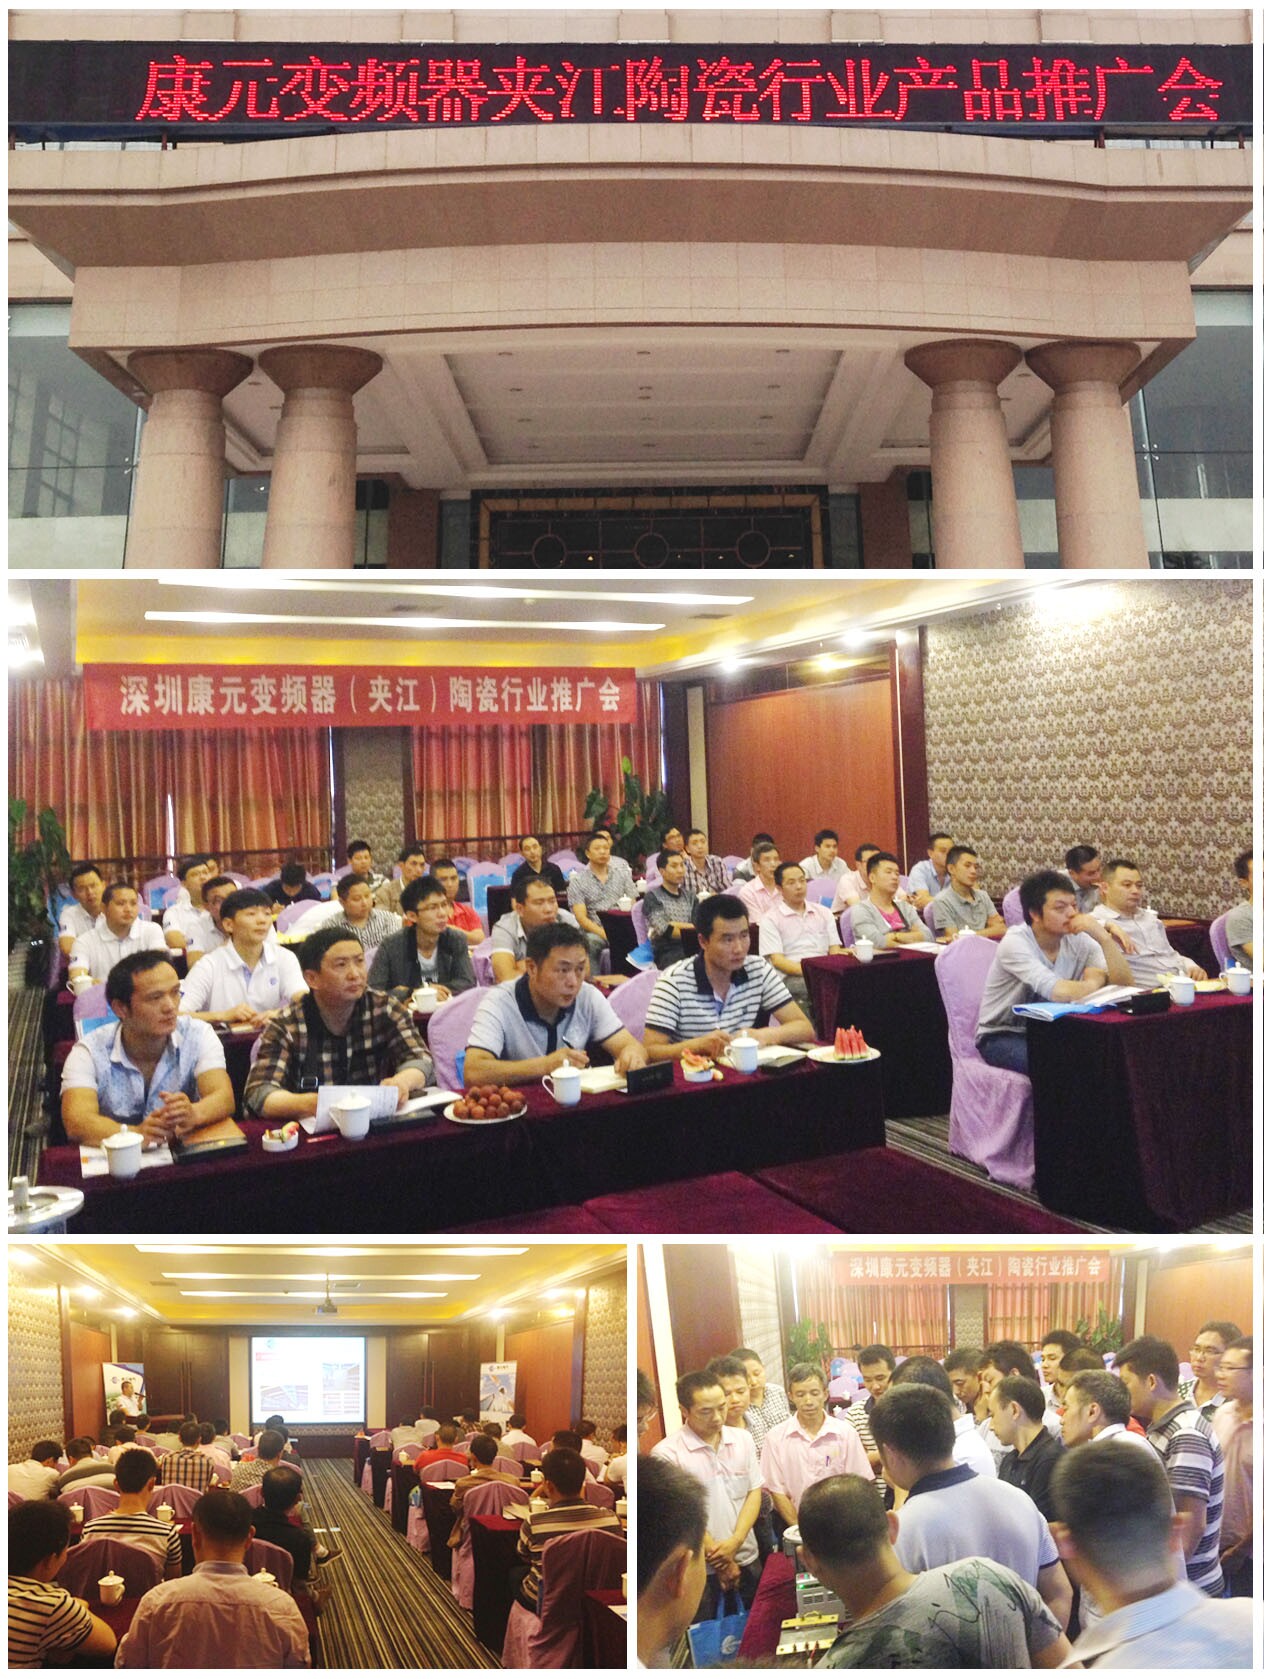 A picture of Jiajiang Ceramics Exchange Conference